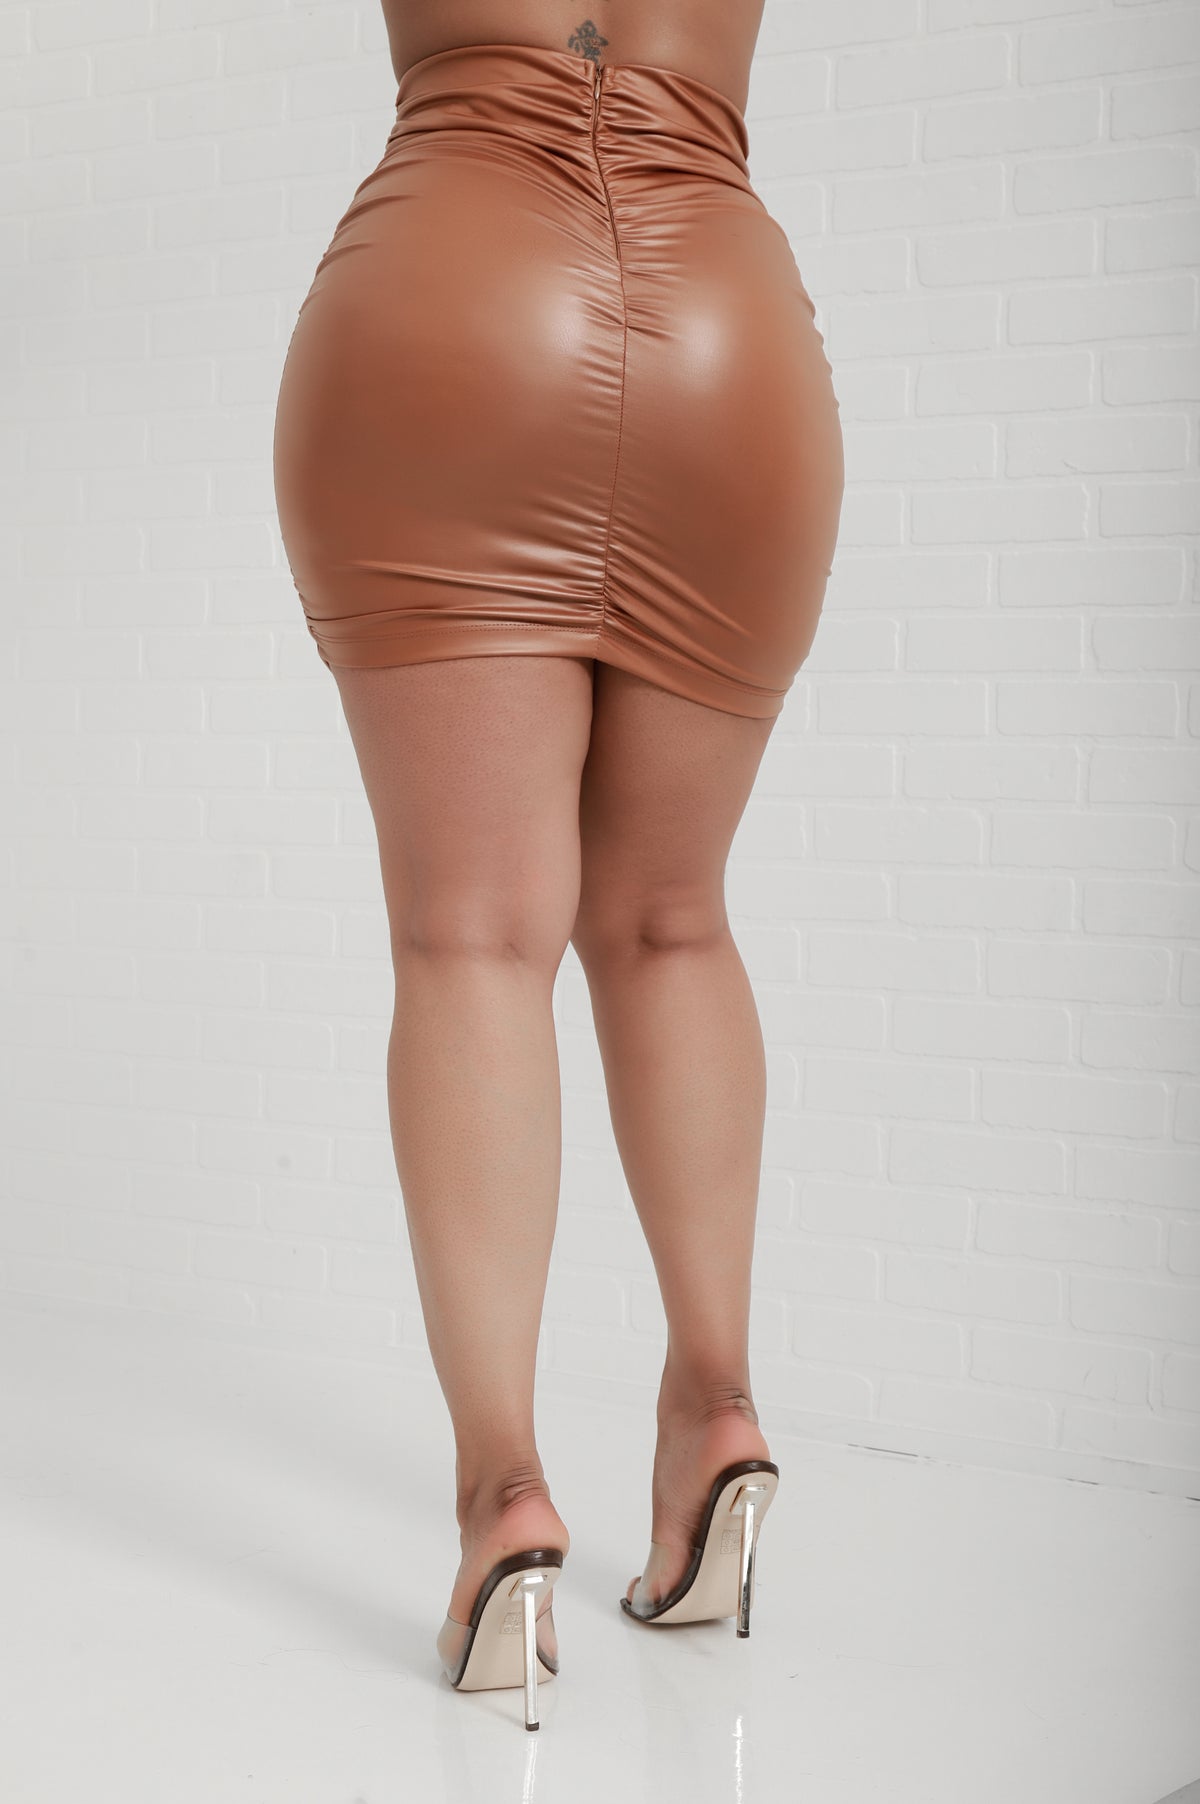 
              Roll Camera Ruched Faux Leather Mini Skirt - Caramel - Swank A Posh
            